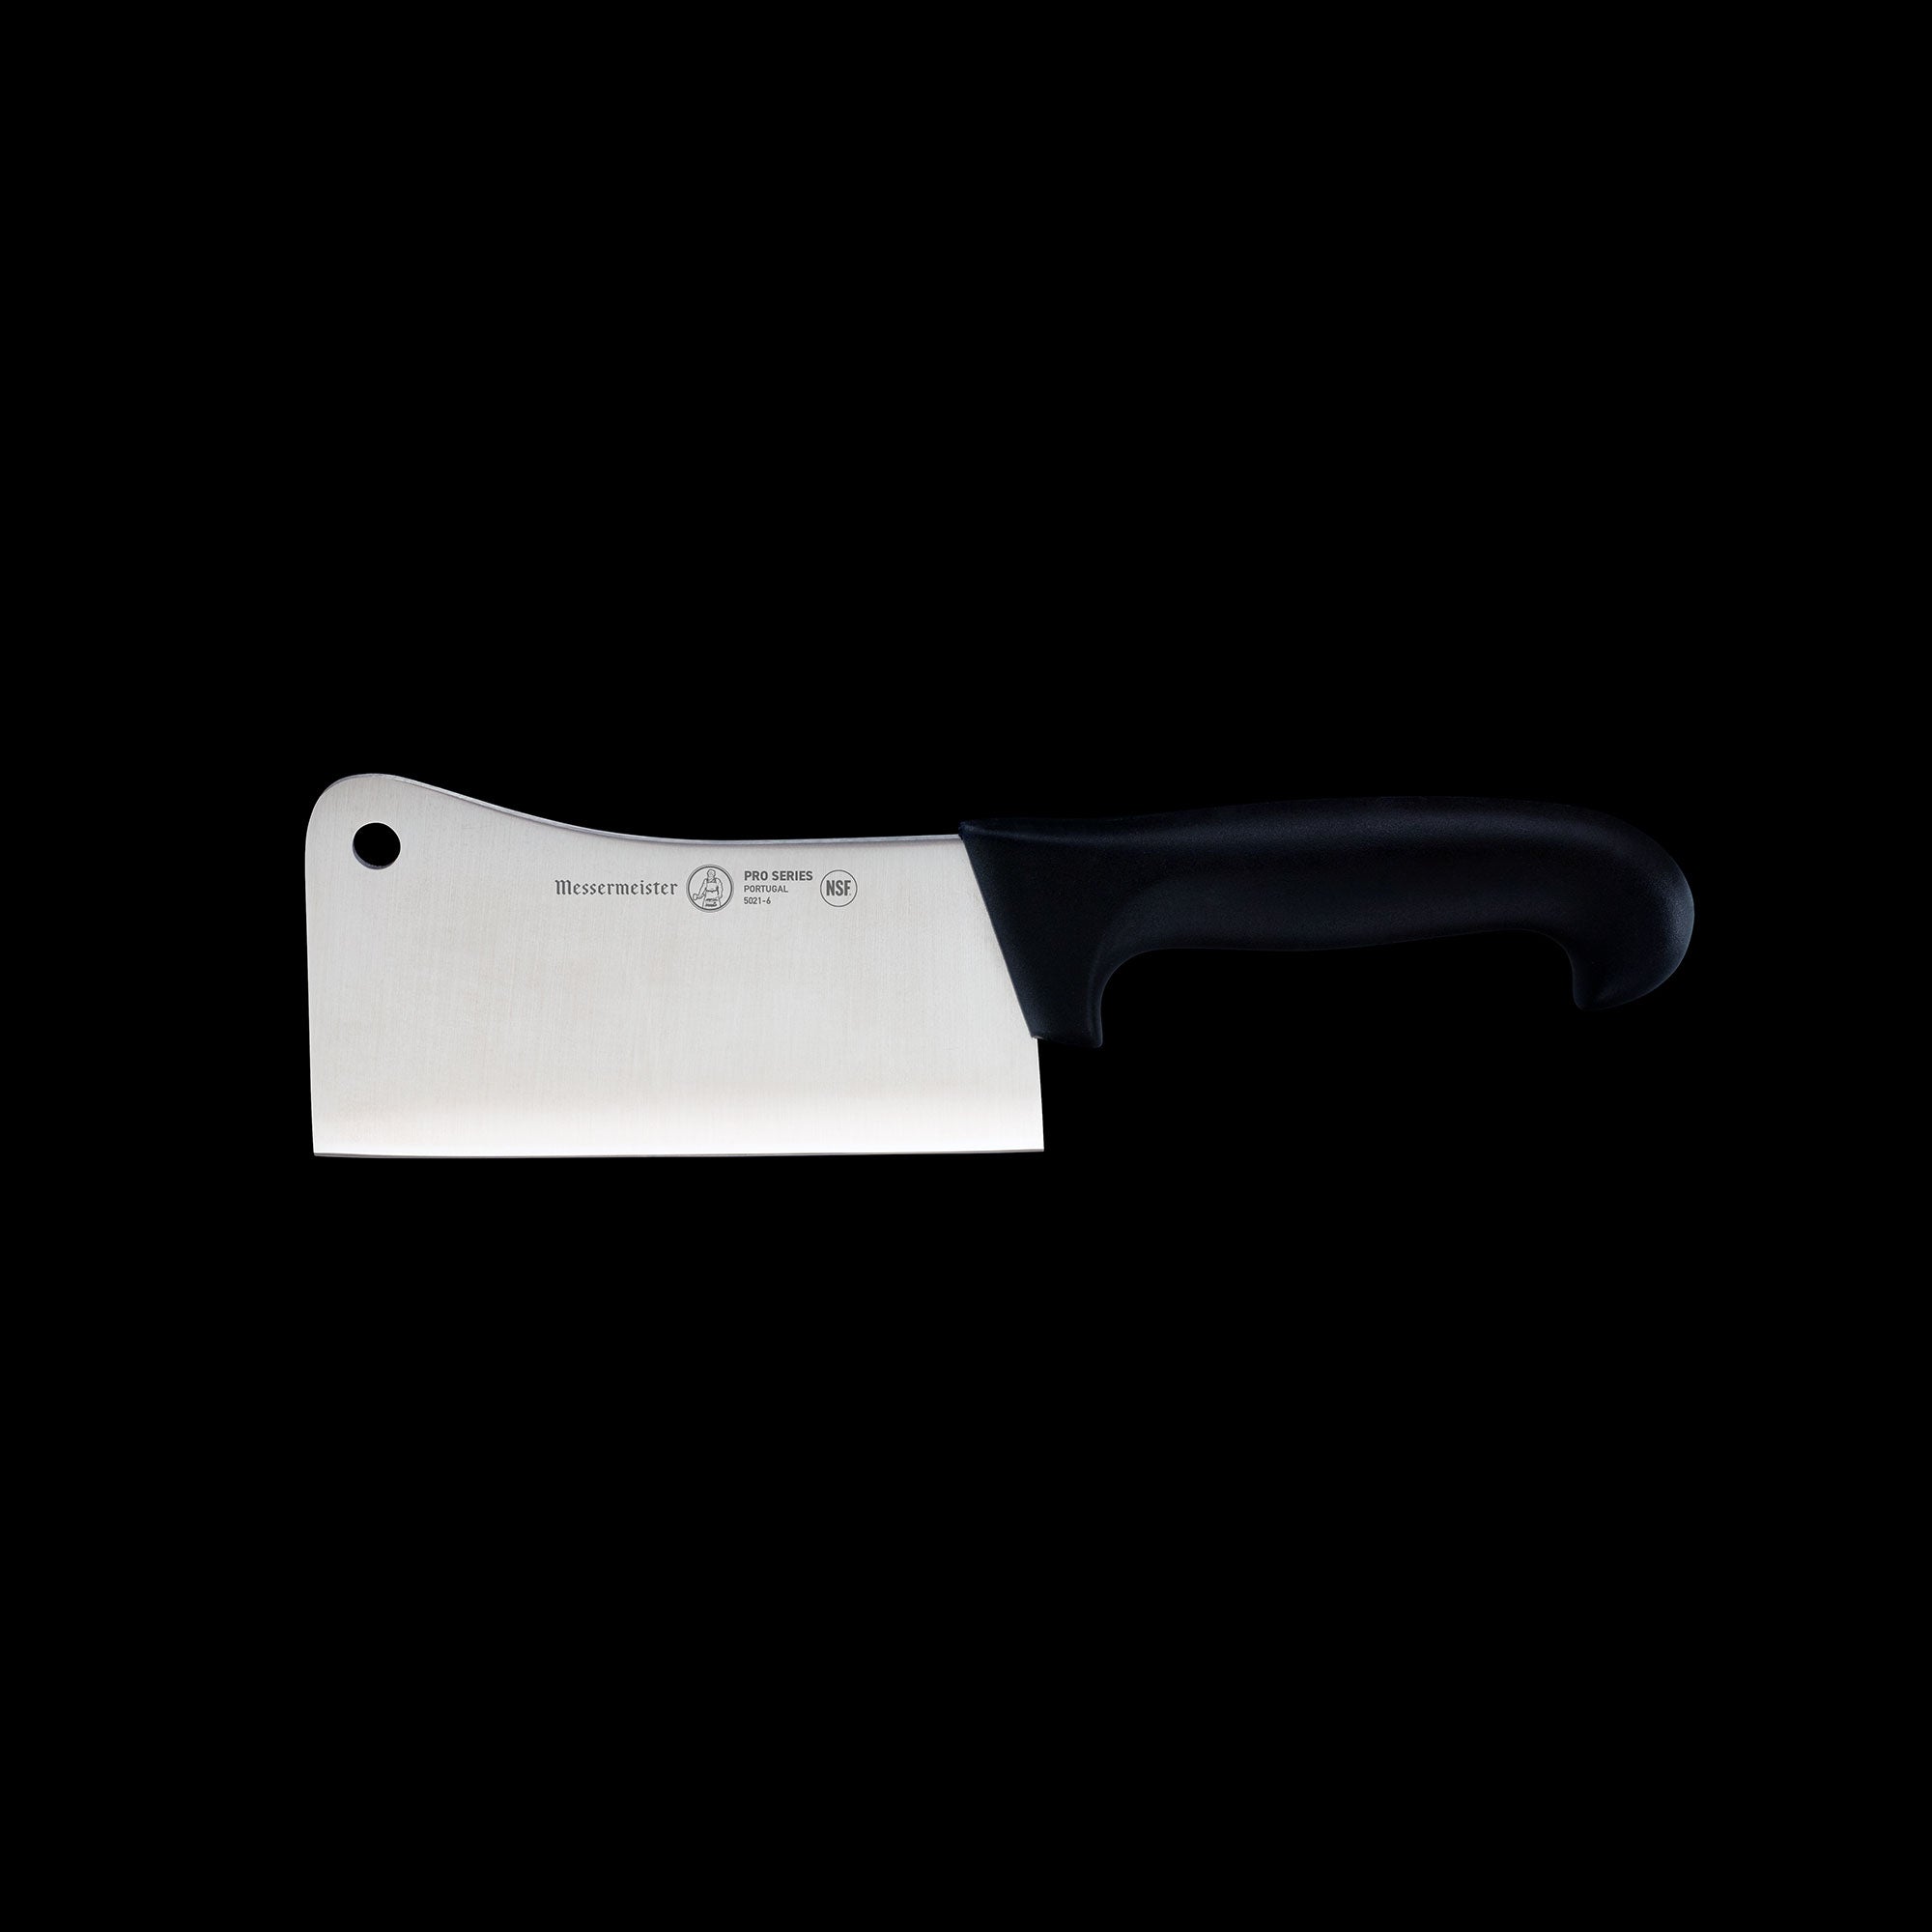 Messermeister Carbon 6.5 Chef's - April Bloomfield's Knife